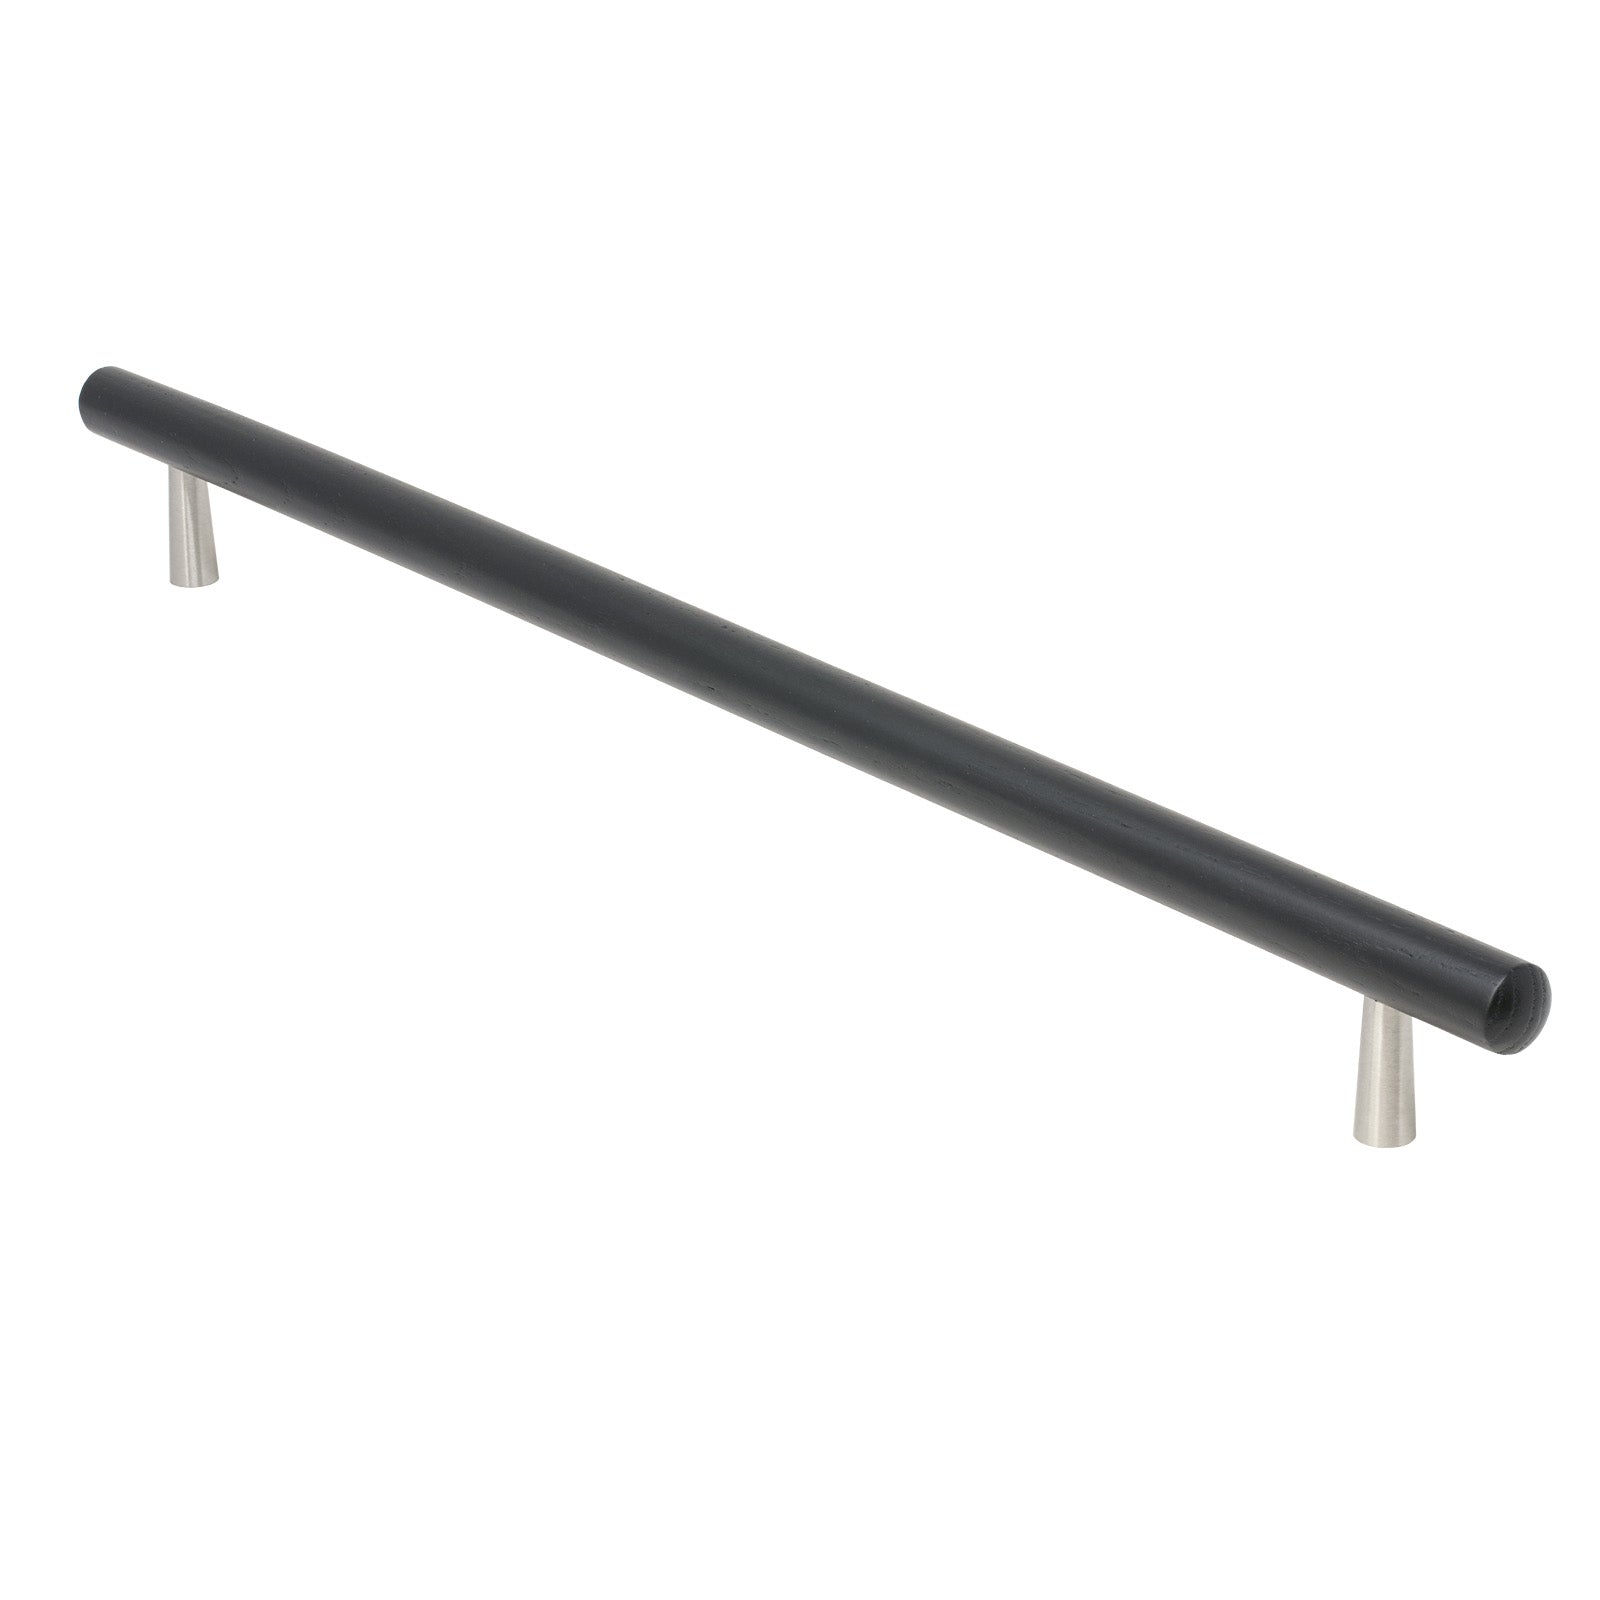 SHOW 320mm T-Bar Tilaa Cabinet Pull Handle In Ash Finish